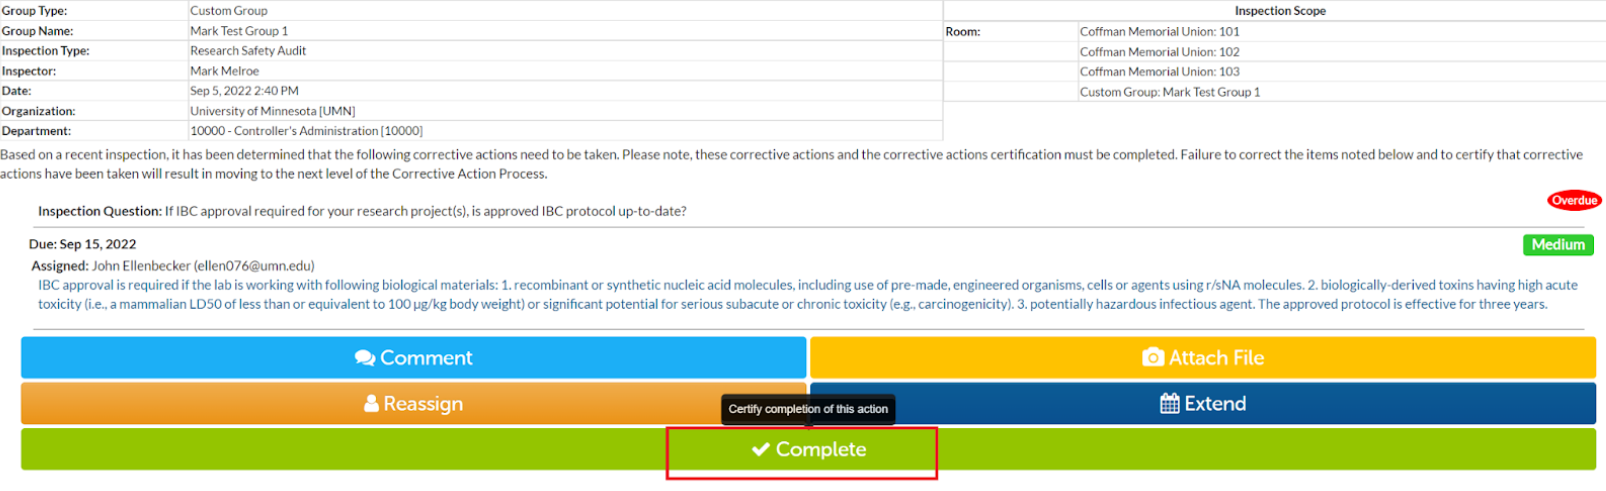 Corrective action identifying the location of the "Complete" button